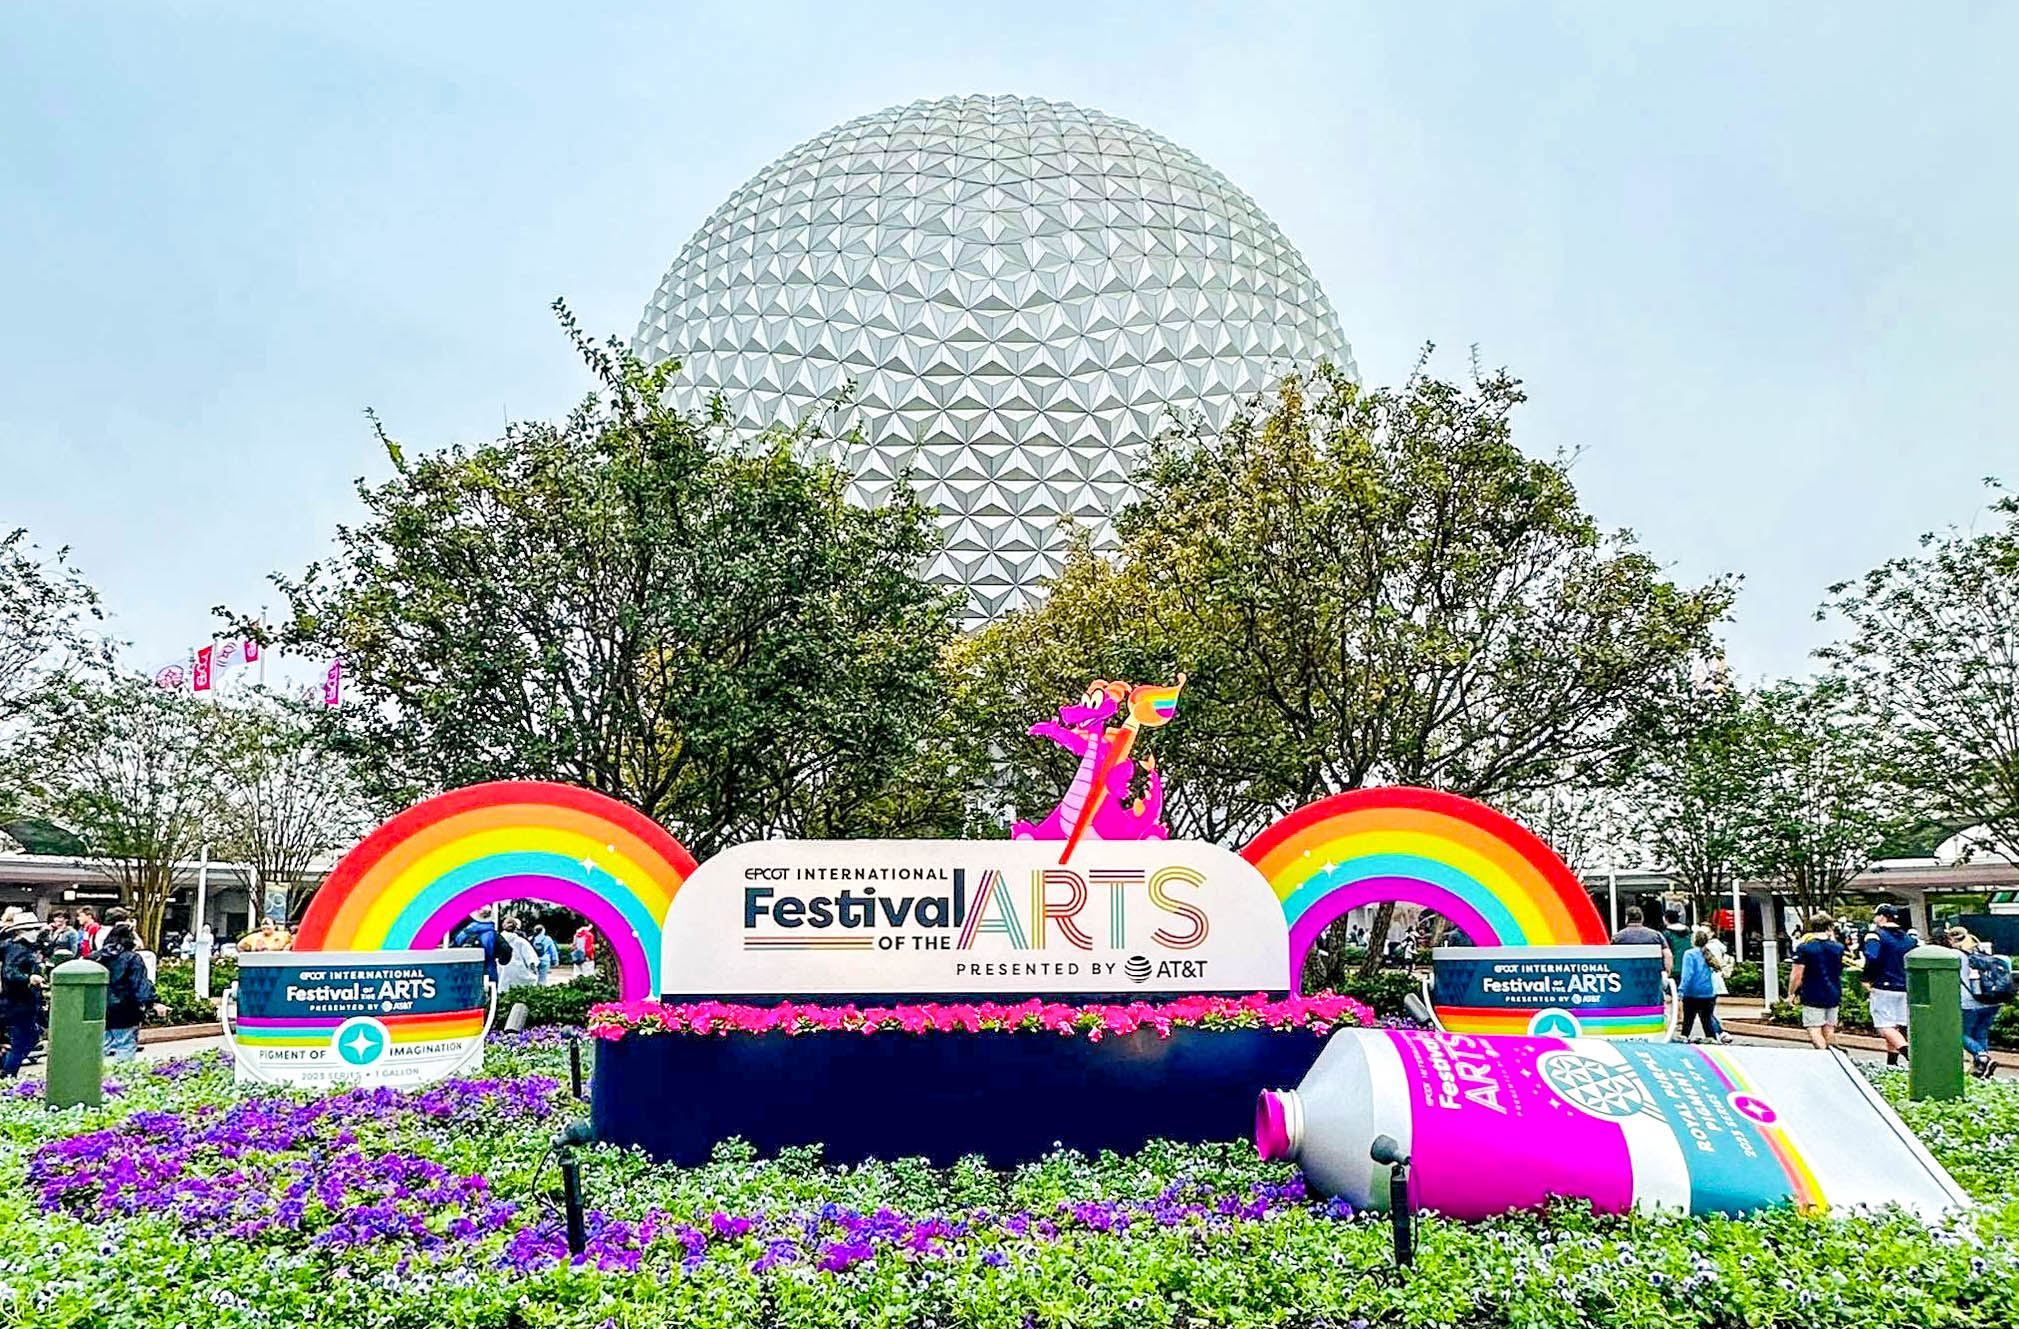 EPCOT Festival of the Arts is here!